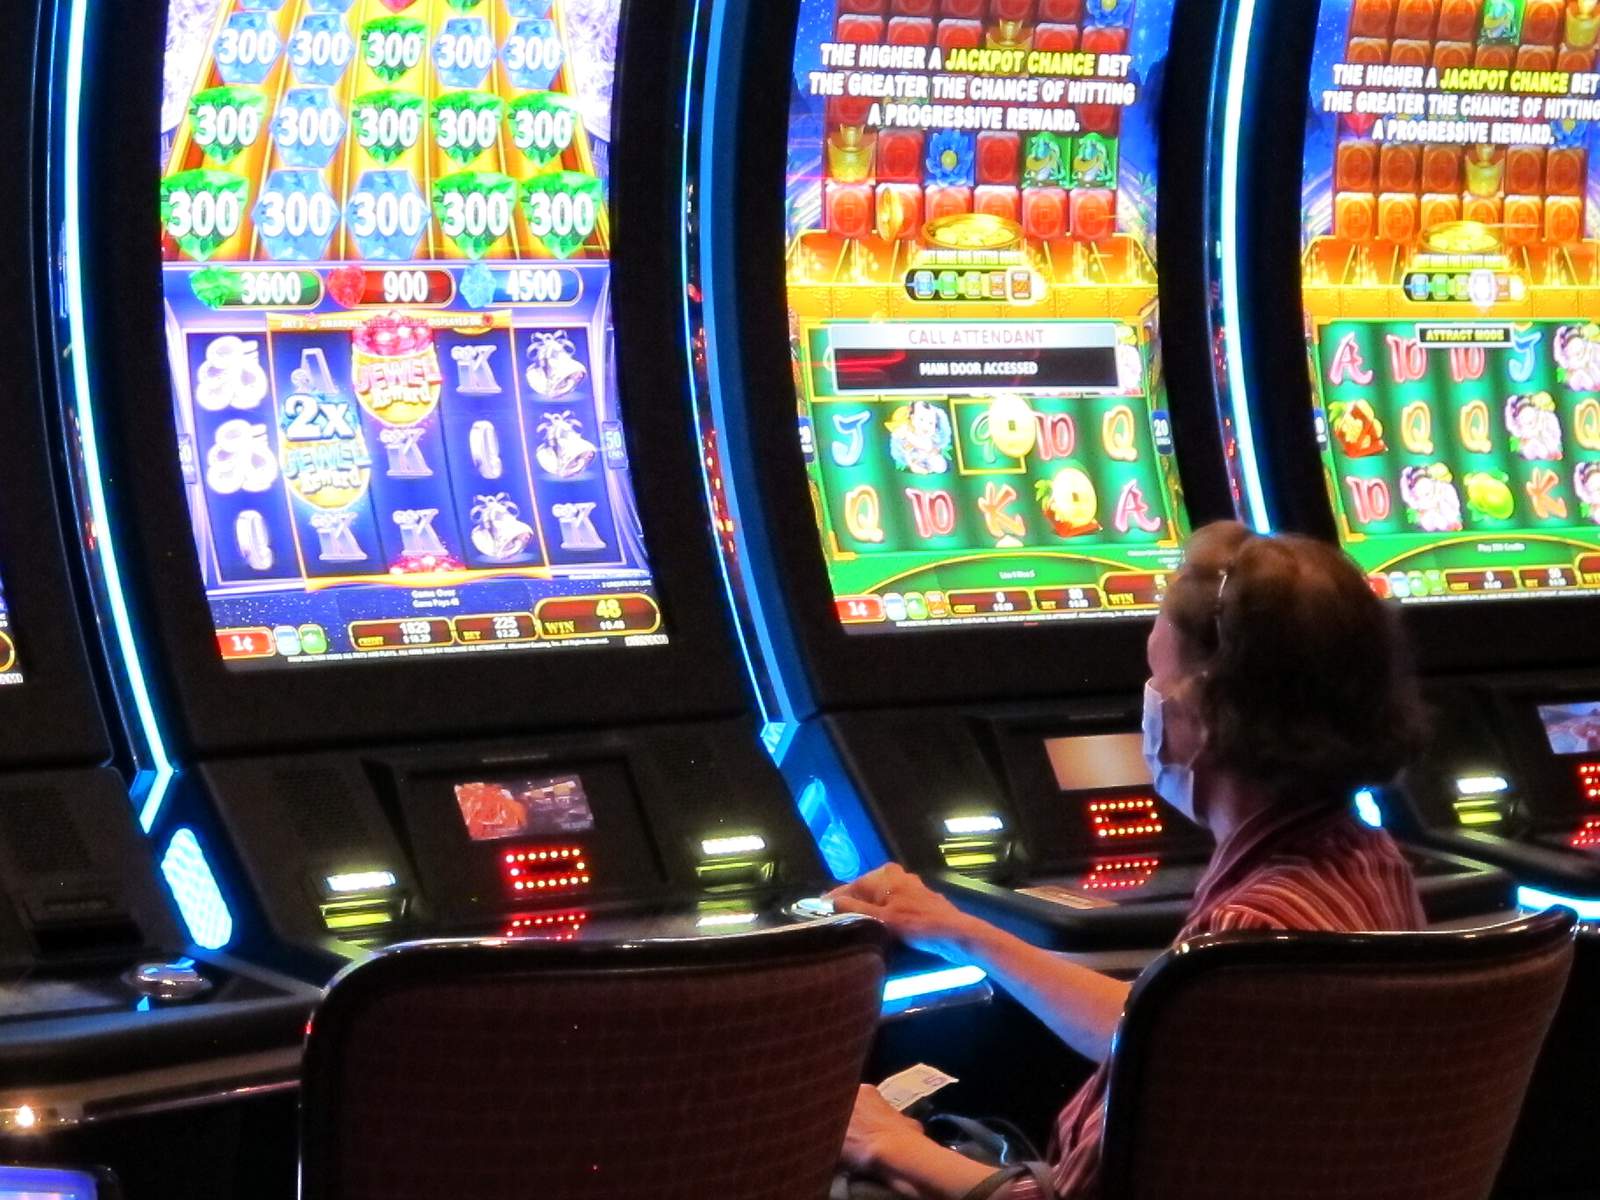 Jackpot! Expansion of gambling in the US wins big at polls